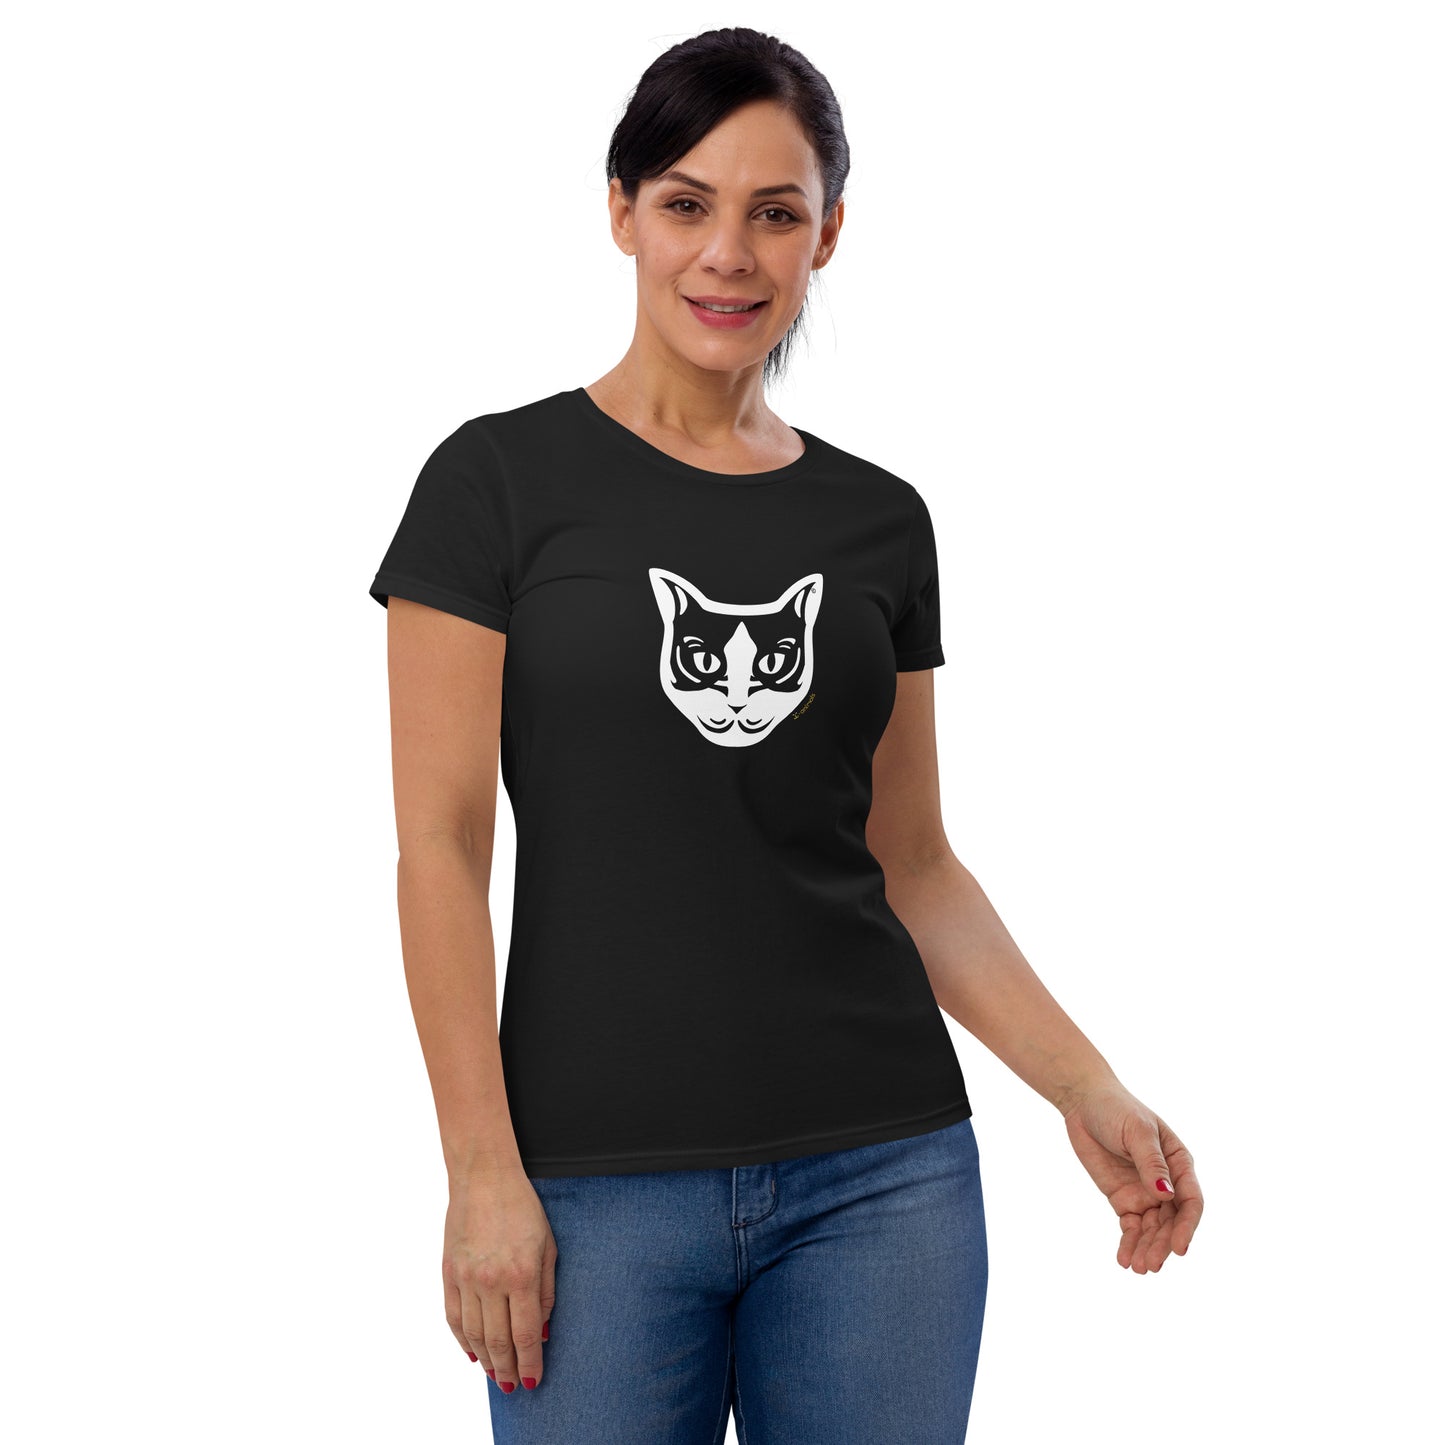 Women's Fashion Fit T-Shirt - Black and White Ca - Tribal